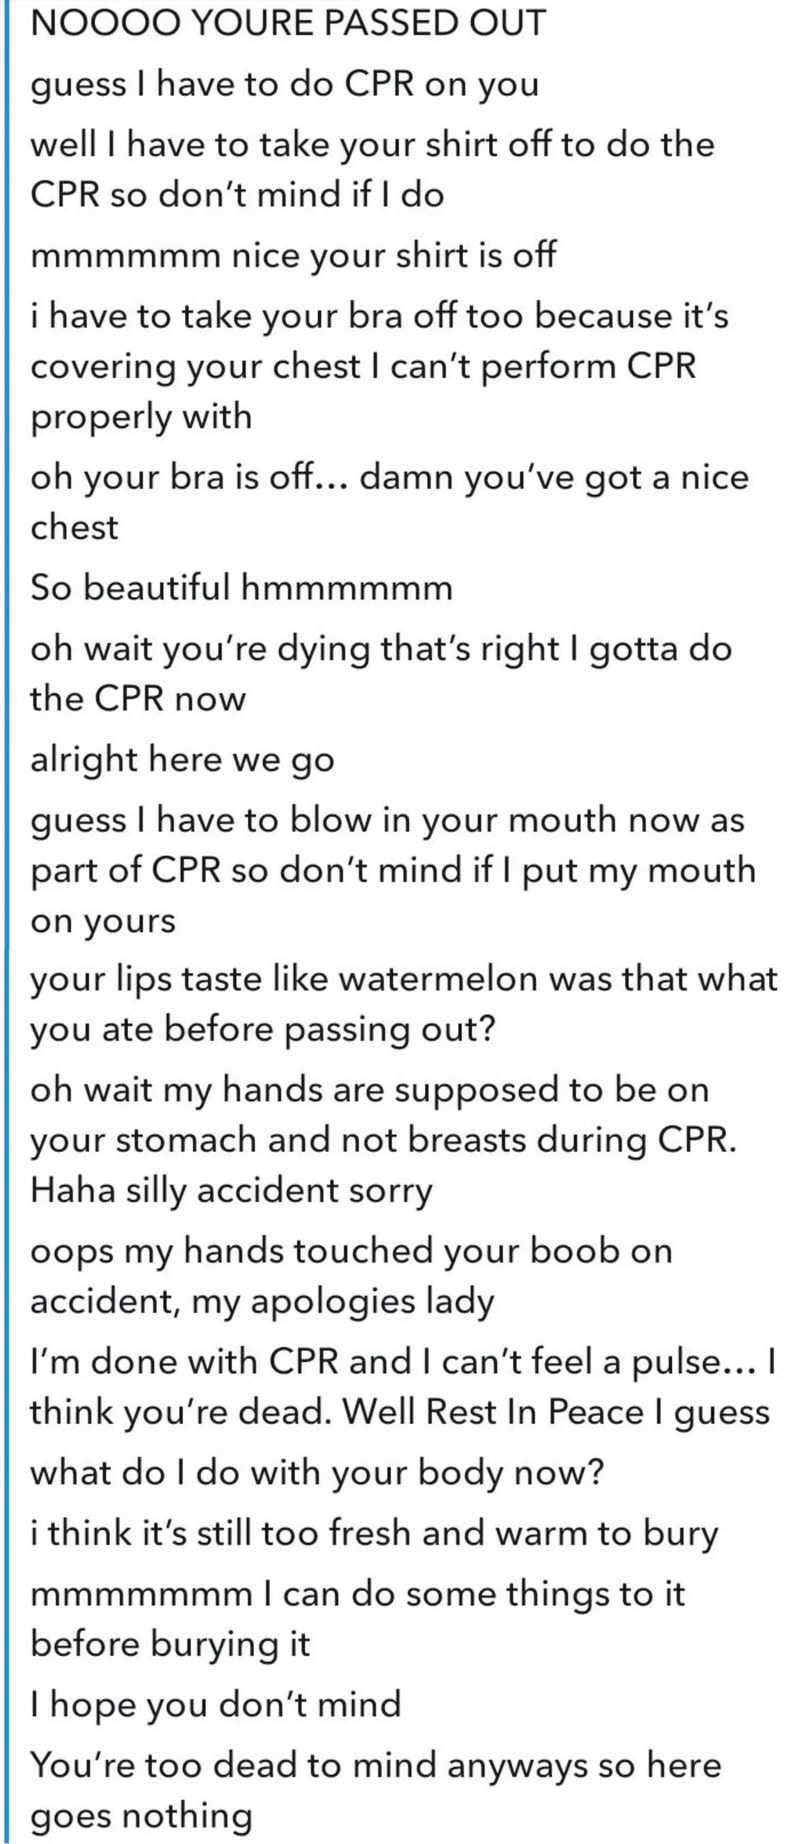 a person using CPR and someone being unconscious in their creepy sexts